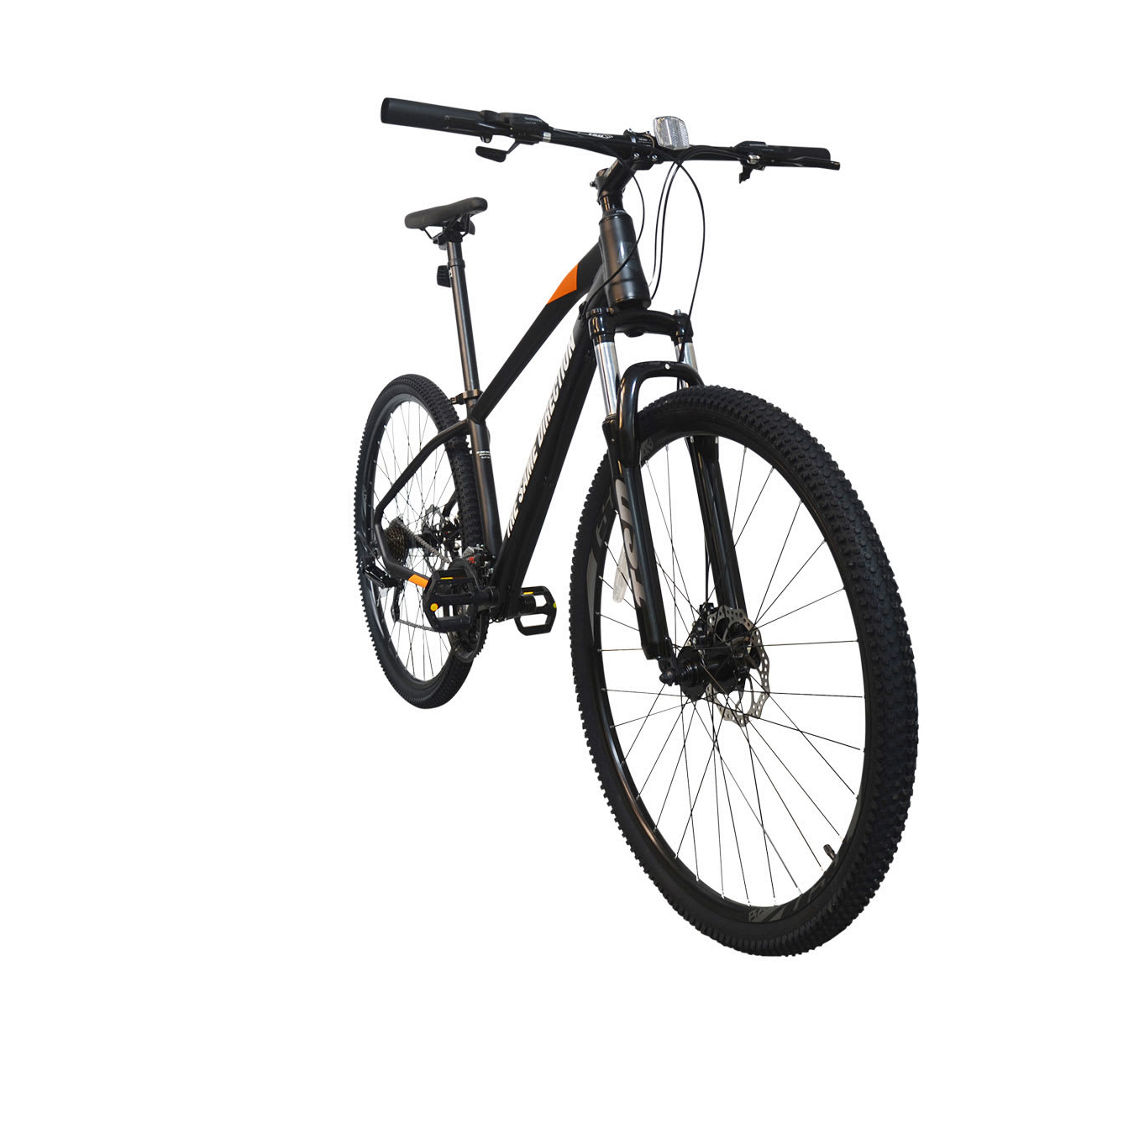 TSD Bicycles Cliff Hawk 27 in. Front Suspension Mountain Bike - Image 2 of 5